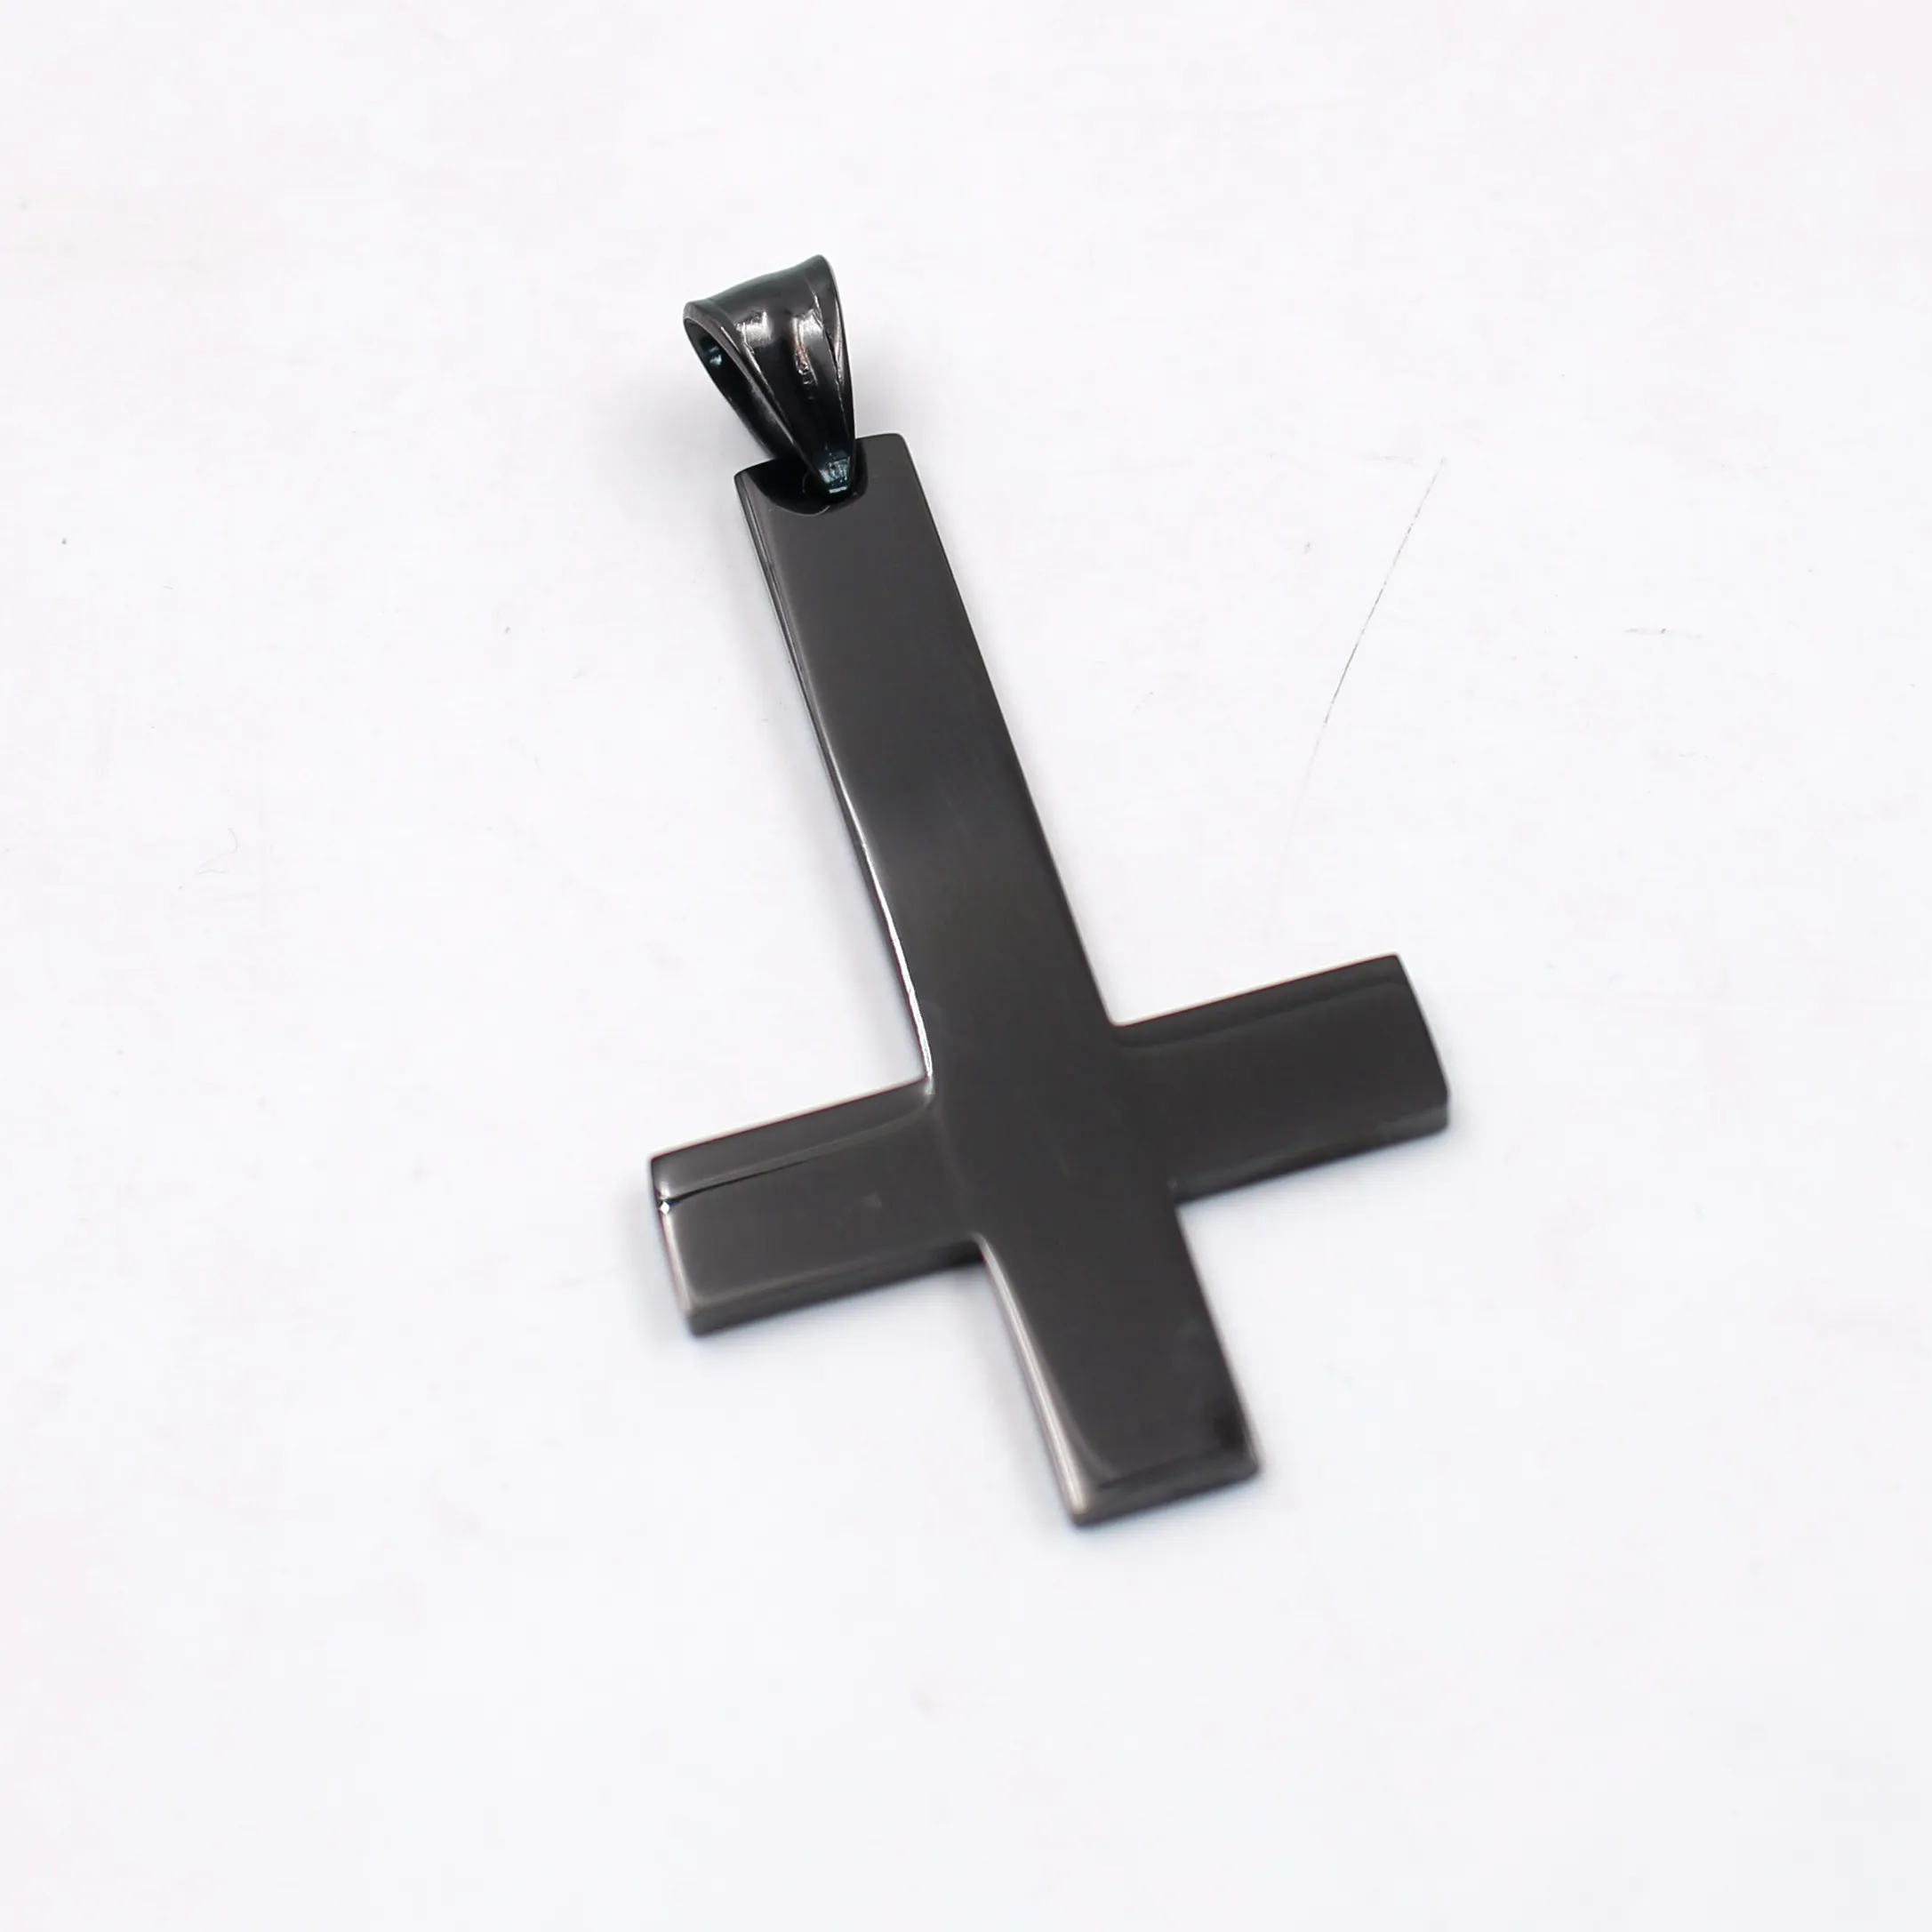 free ship Mens Jewelry IP Black Plated Pure Stainless Steel upside-down Cross Pendant Necklace Rolo chain 24'' 3MM WIDE